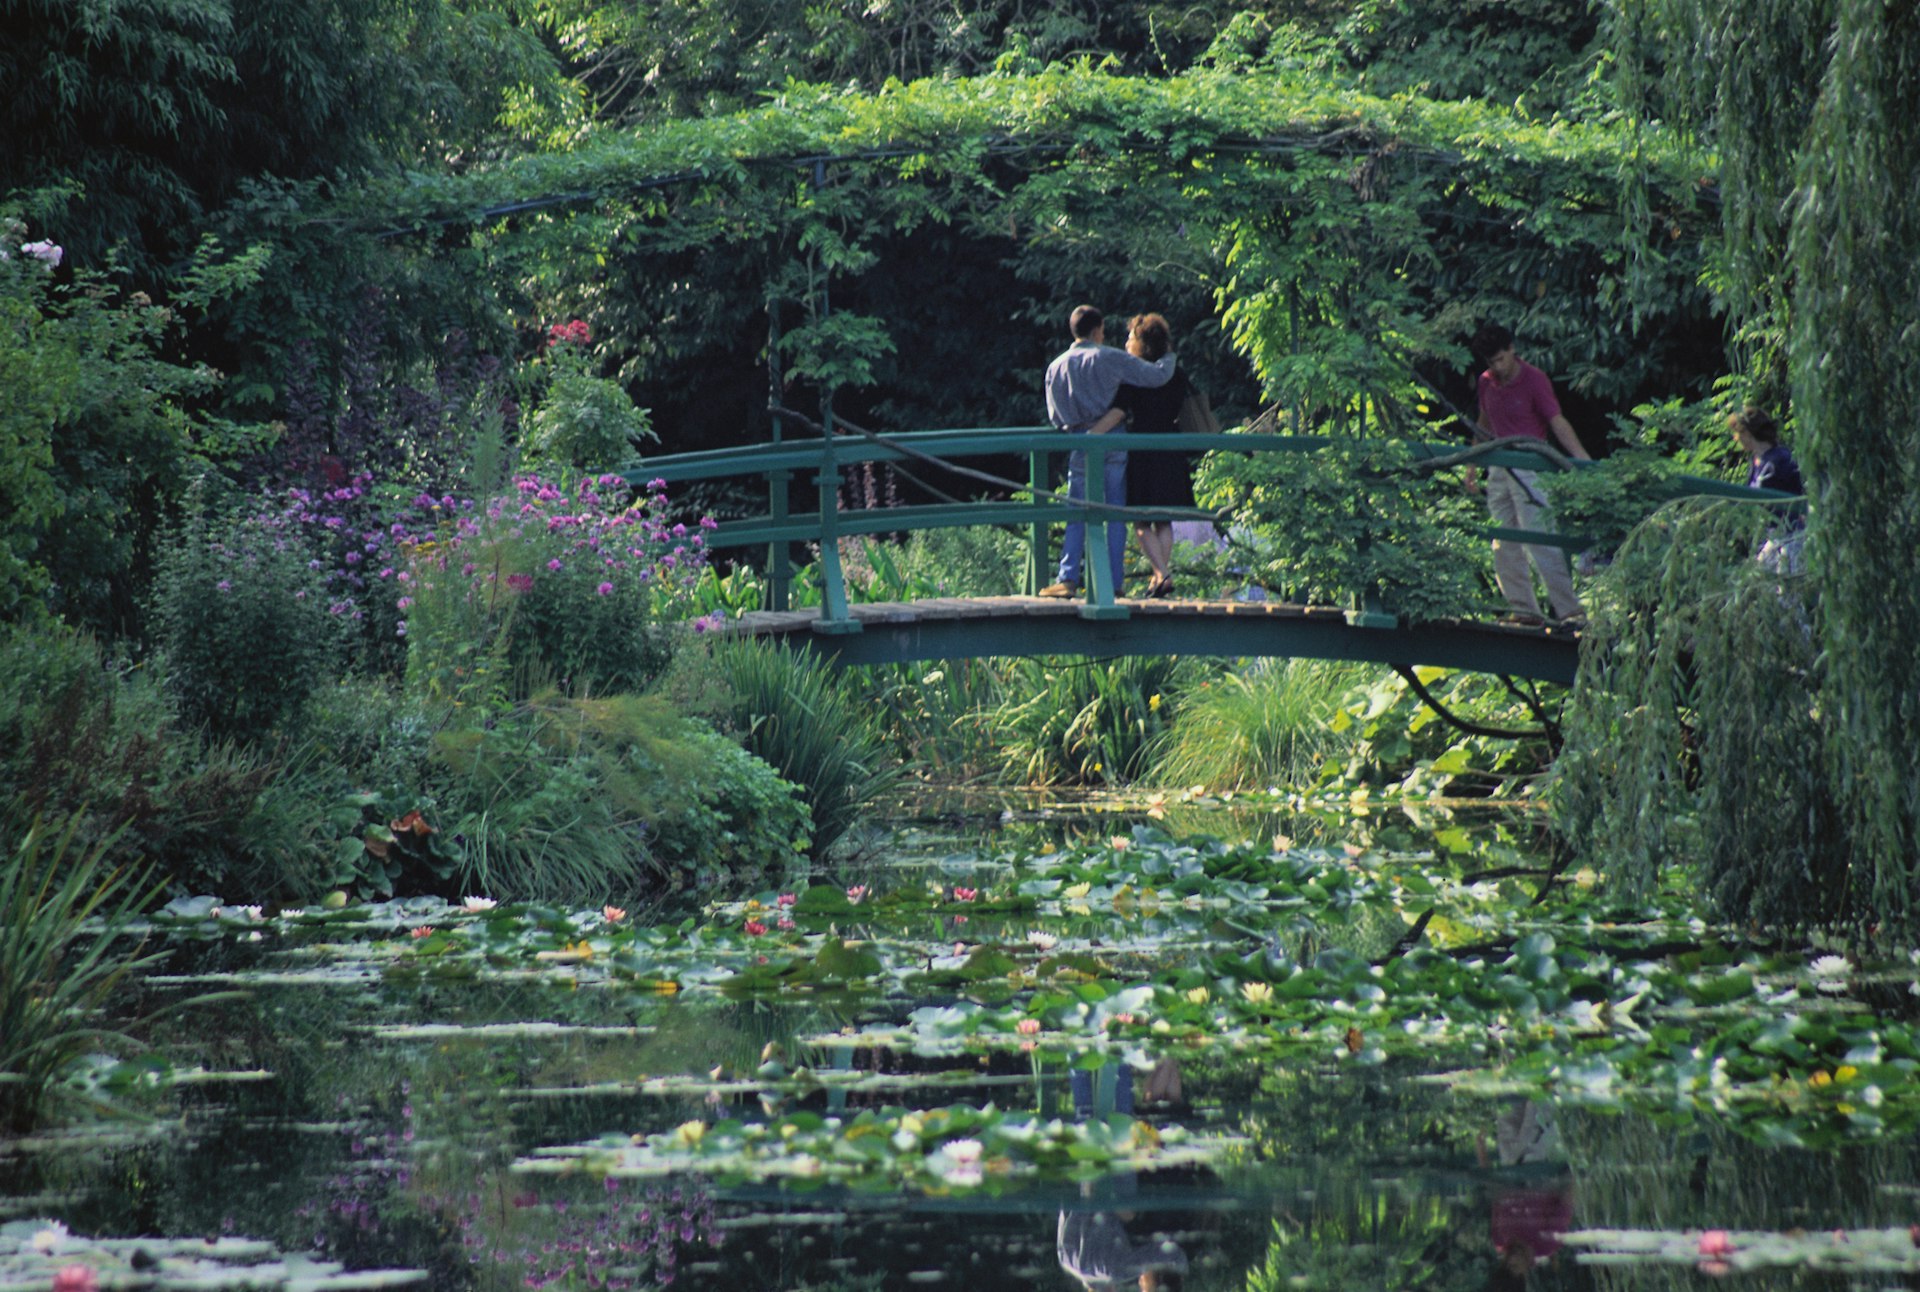 A couple hug each other as they enjoy the view from a birdge over a peaceful lily pond in a garden